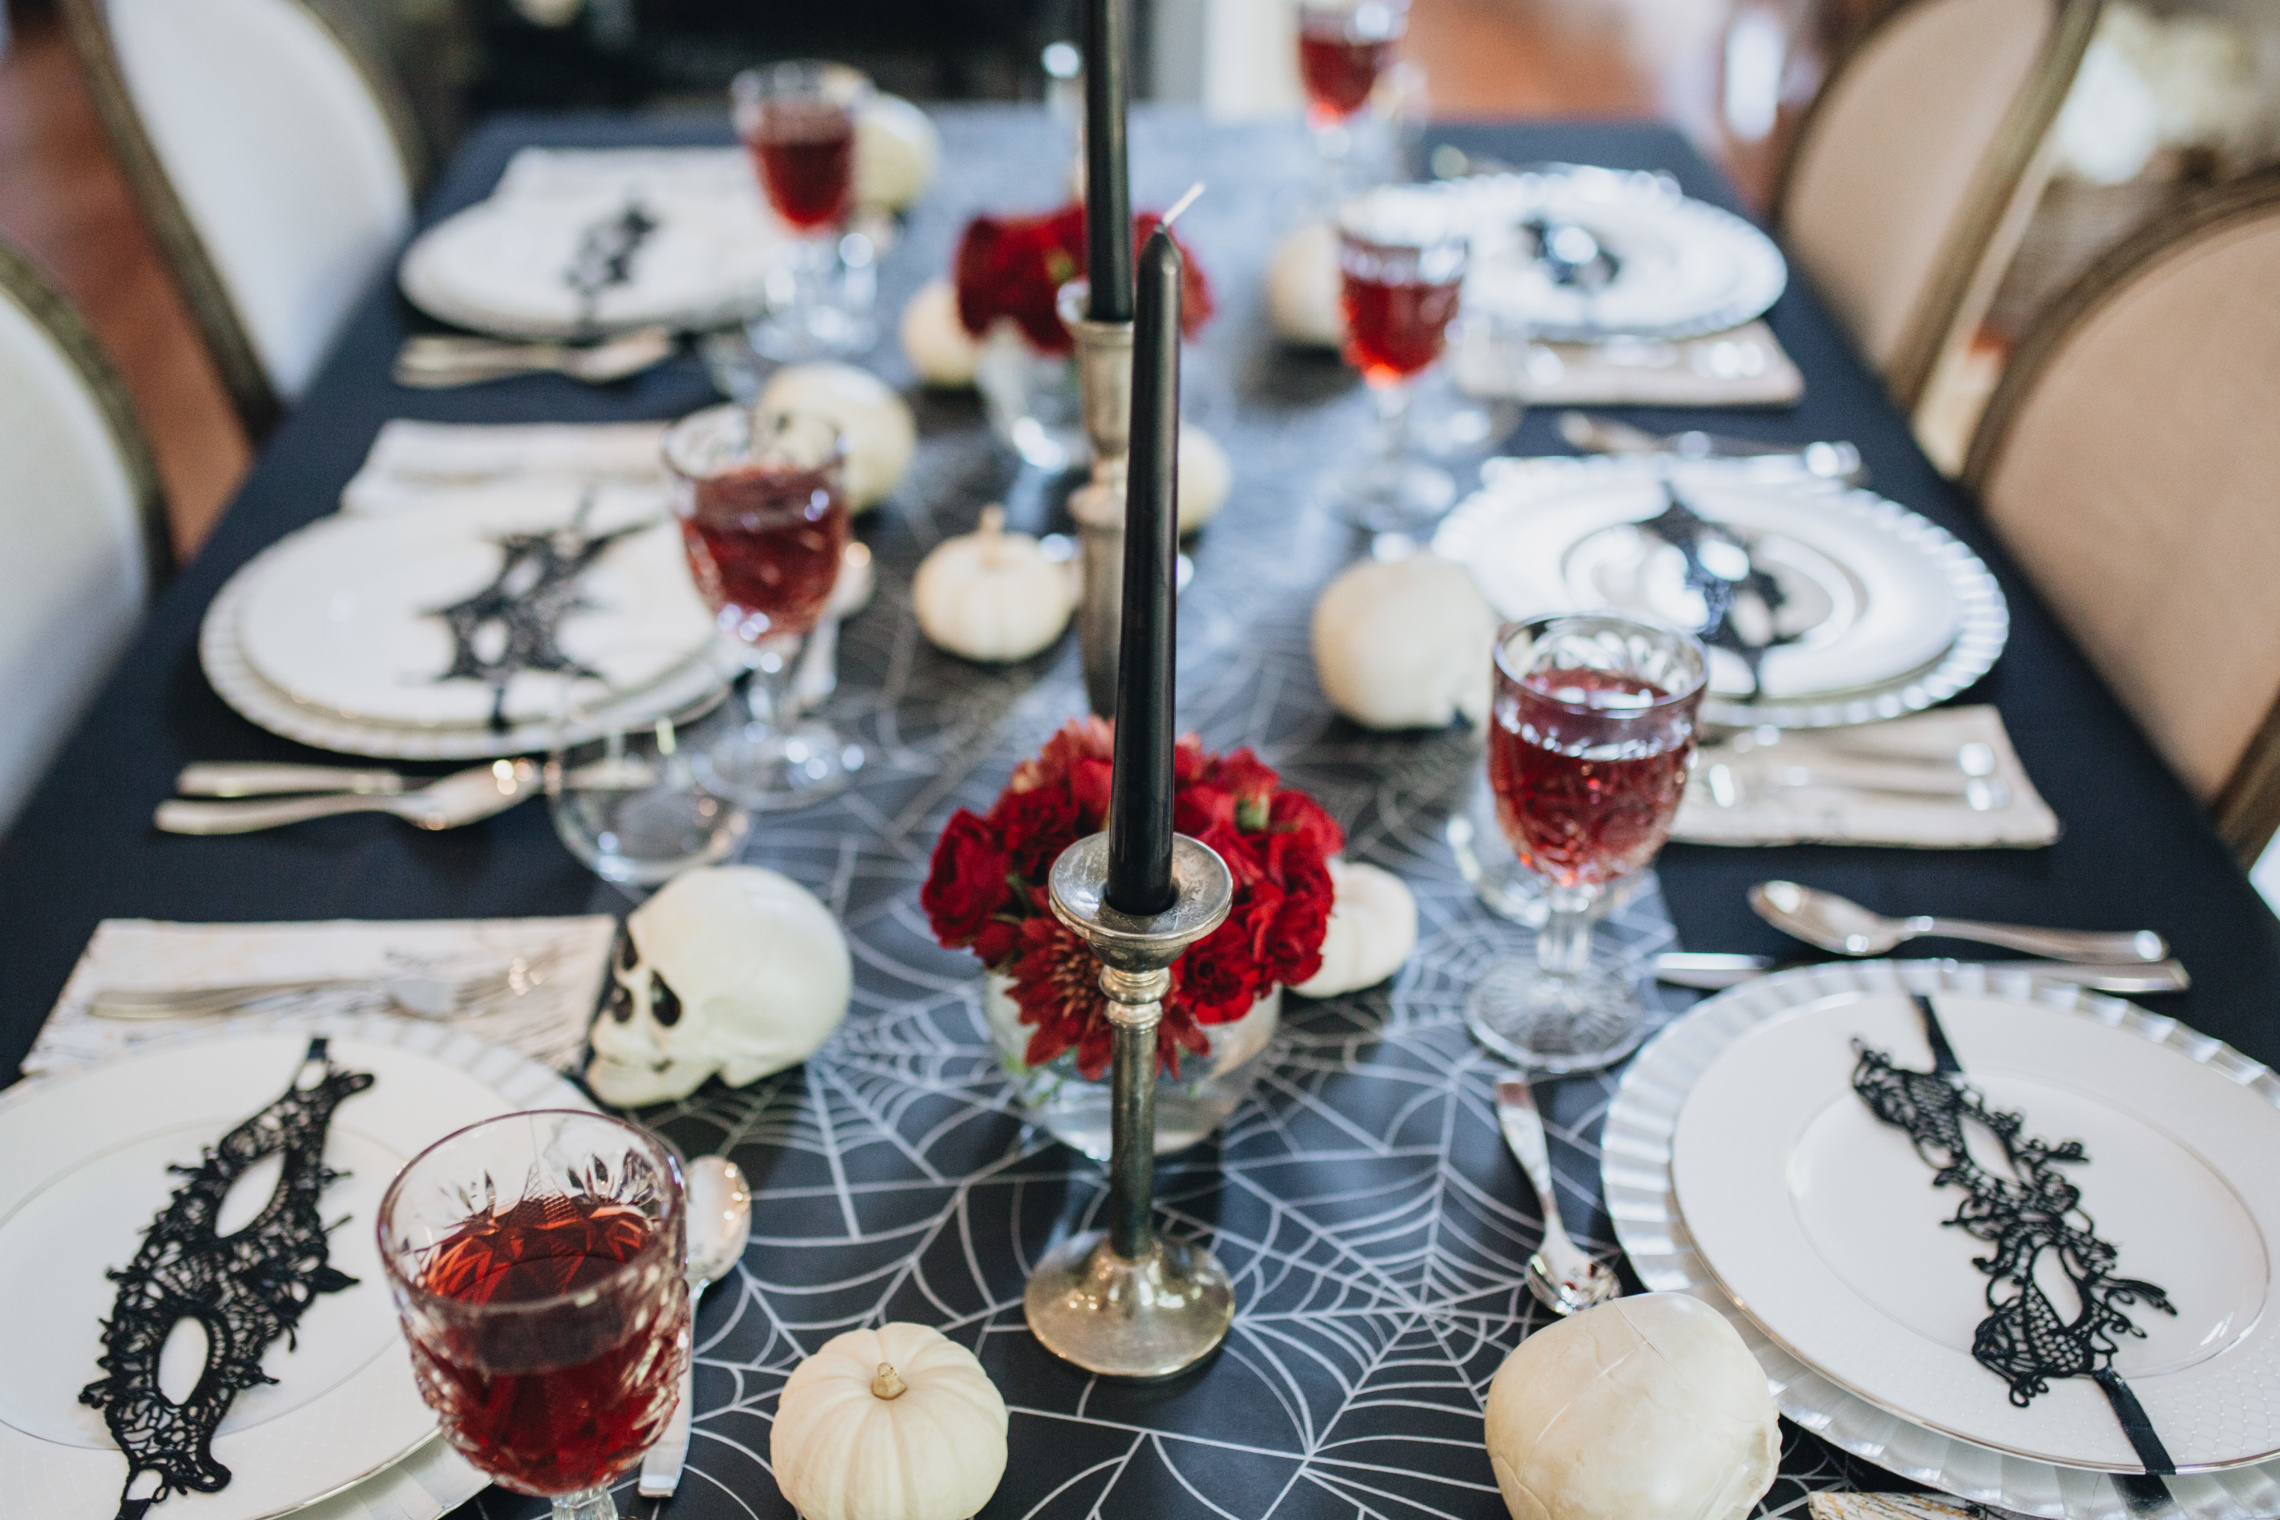 Elegant Black, Red and Gold Halloween Table Setting